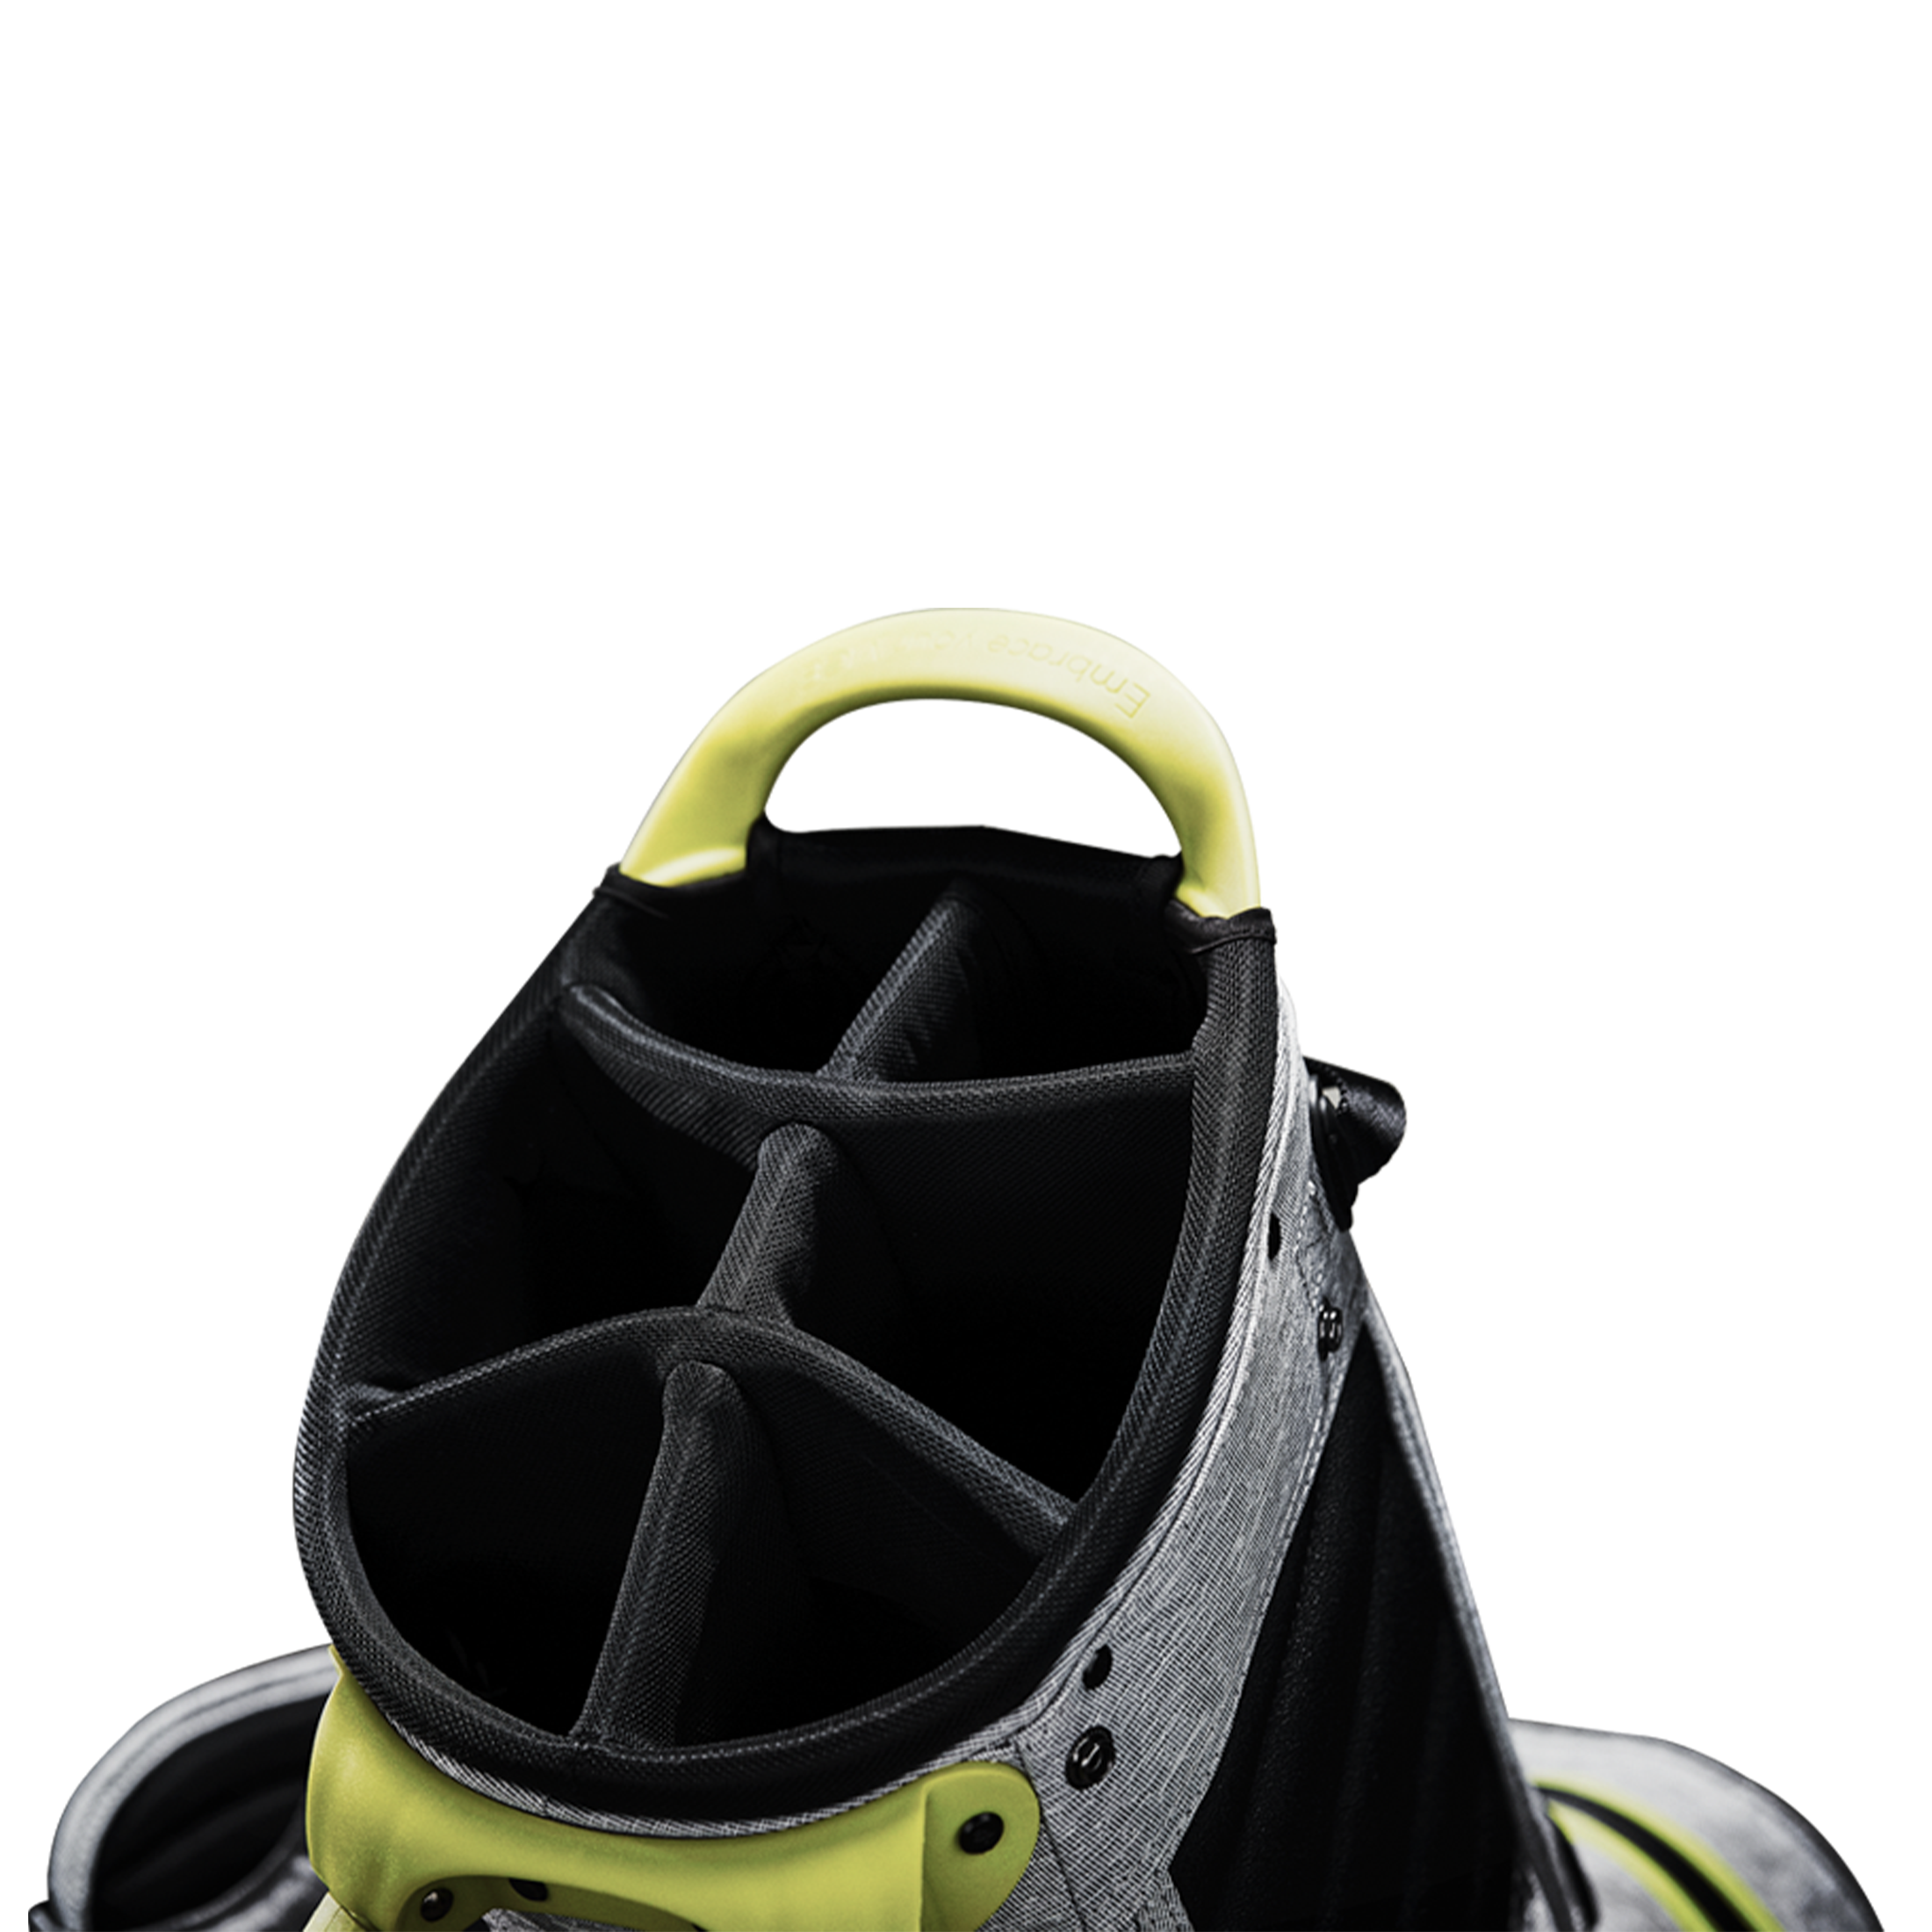 Vice Golf Force Stand Bag - Grey and Neon Lime - image 3 of 11